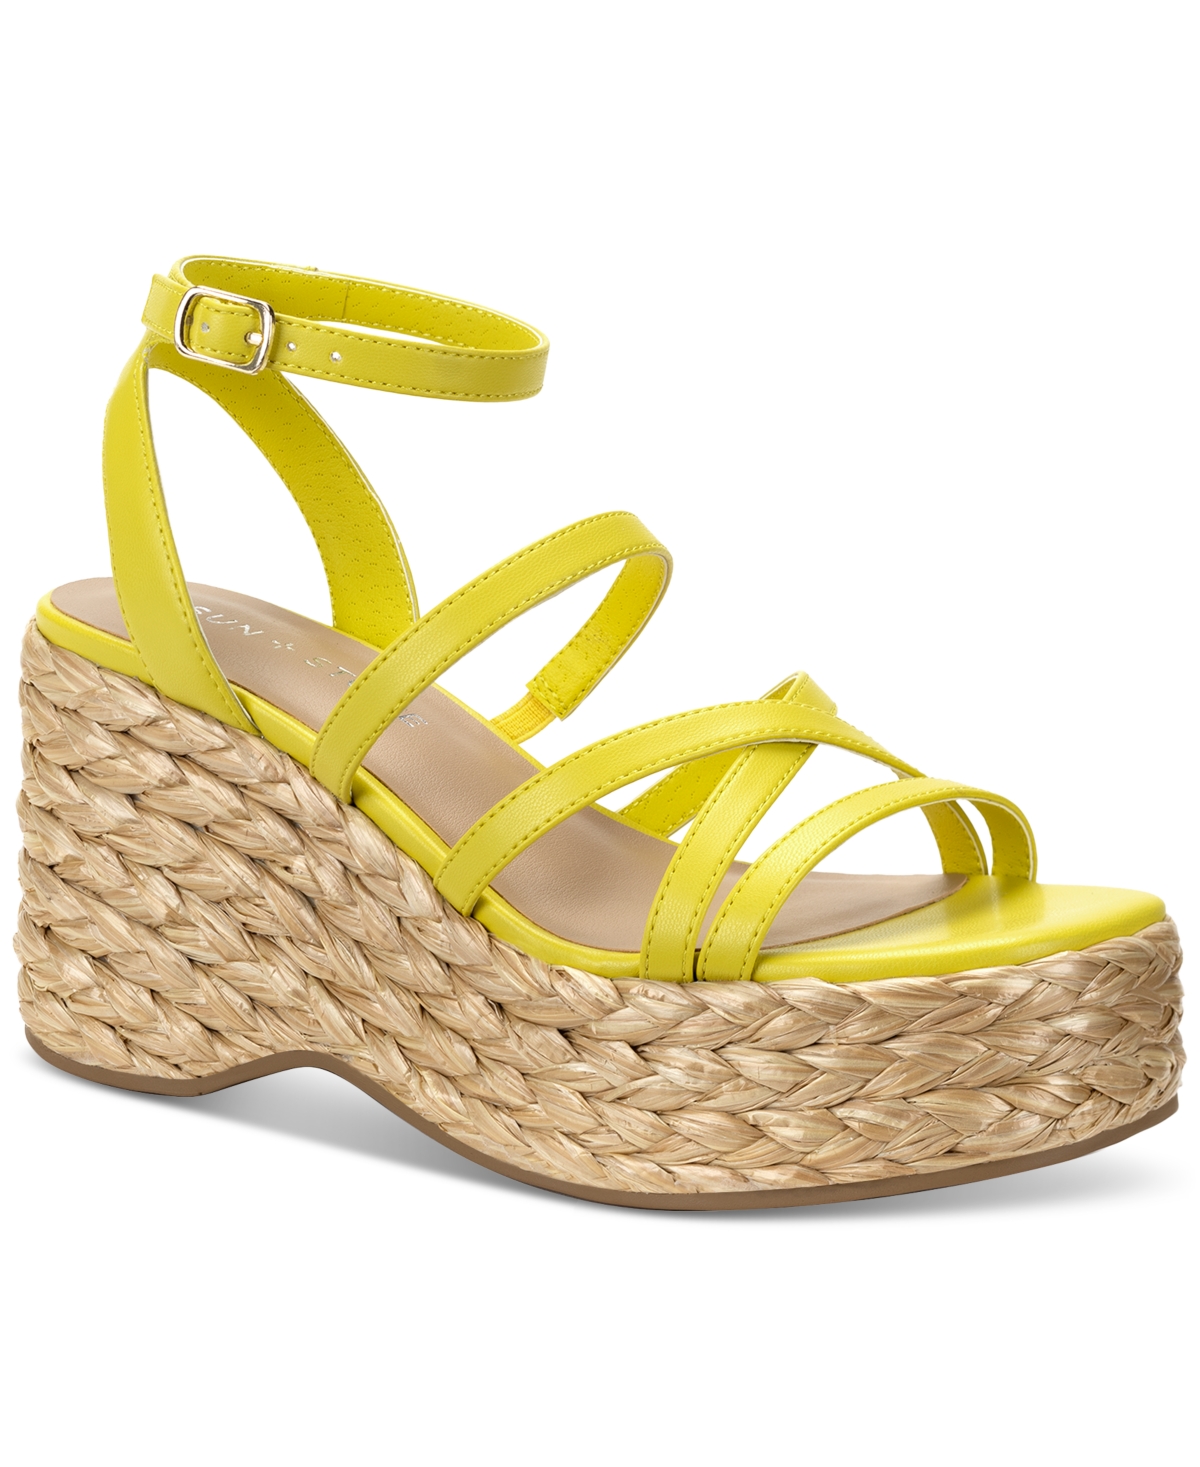 Women's Finnickk Strappy Espadrille Wedge Sandals, Created for Macy's - Citron